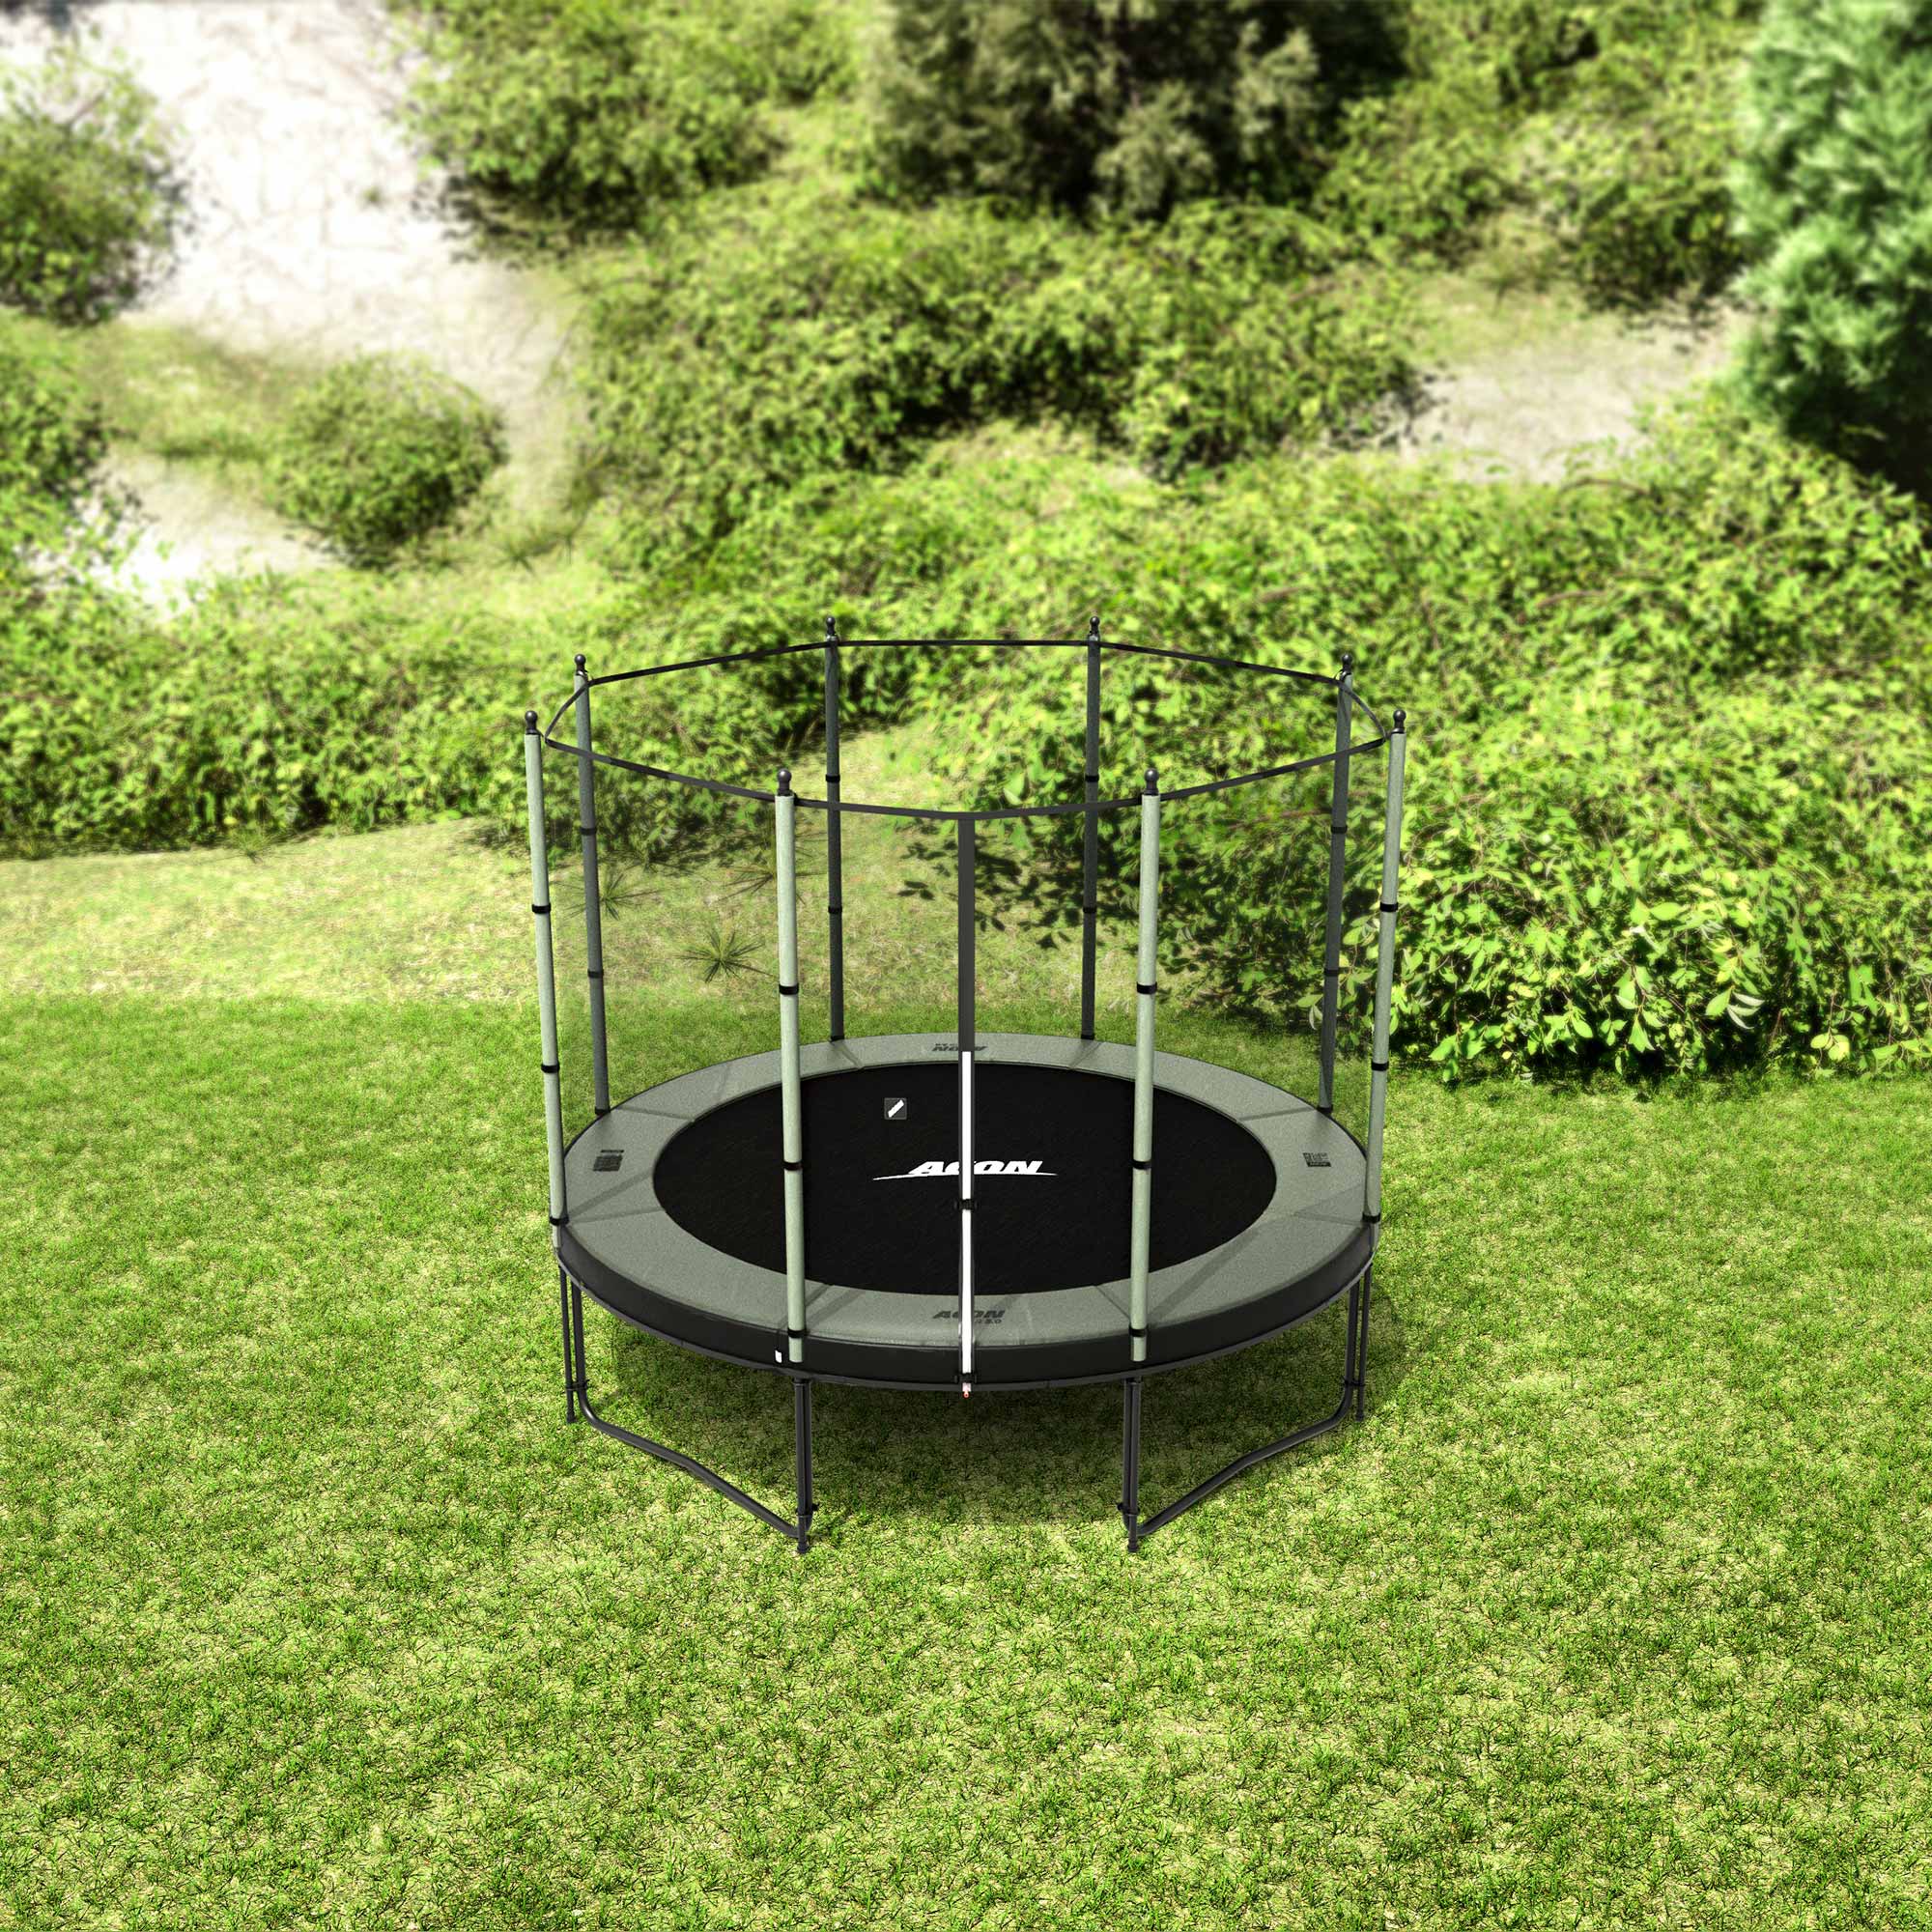 ACON Air 15ft Trampoline Package with Enclosure